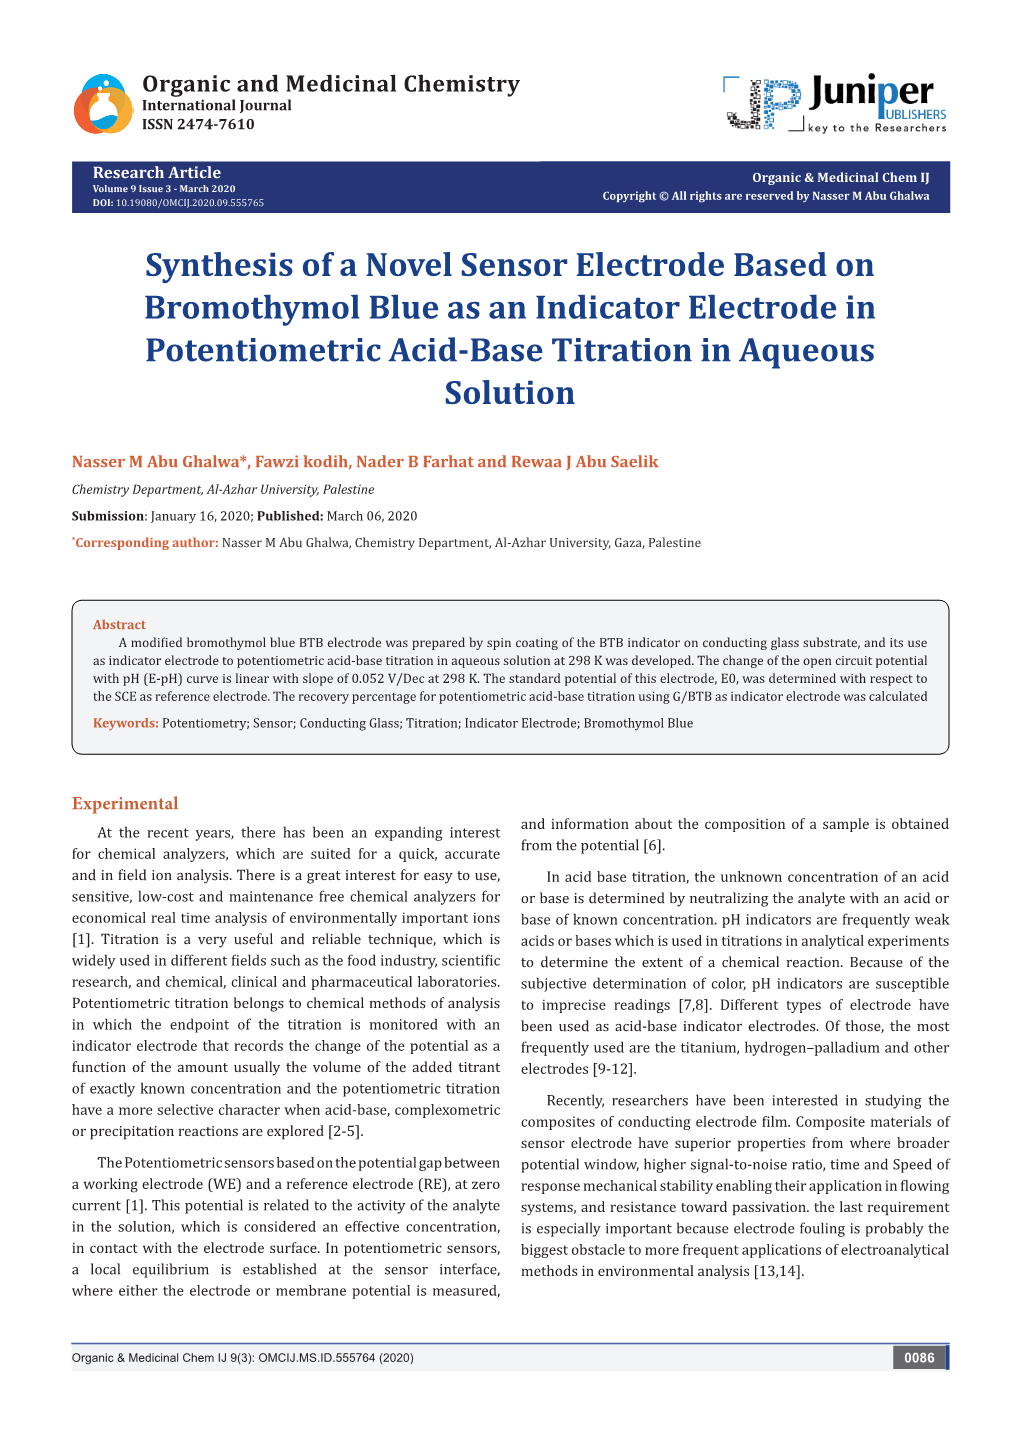 Synthesis of a Novel Sensor Electrode Based on Bromothymol Blue As an Indicator Electrode in Potentiometric Acid-Base Titration in Aqueous Solution